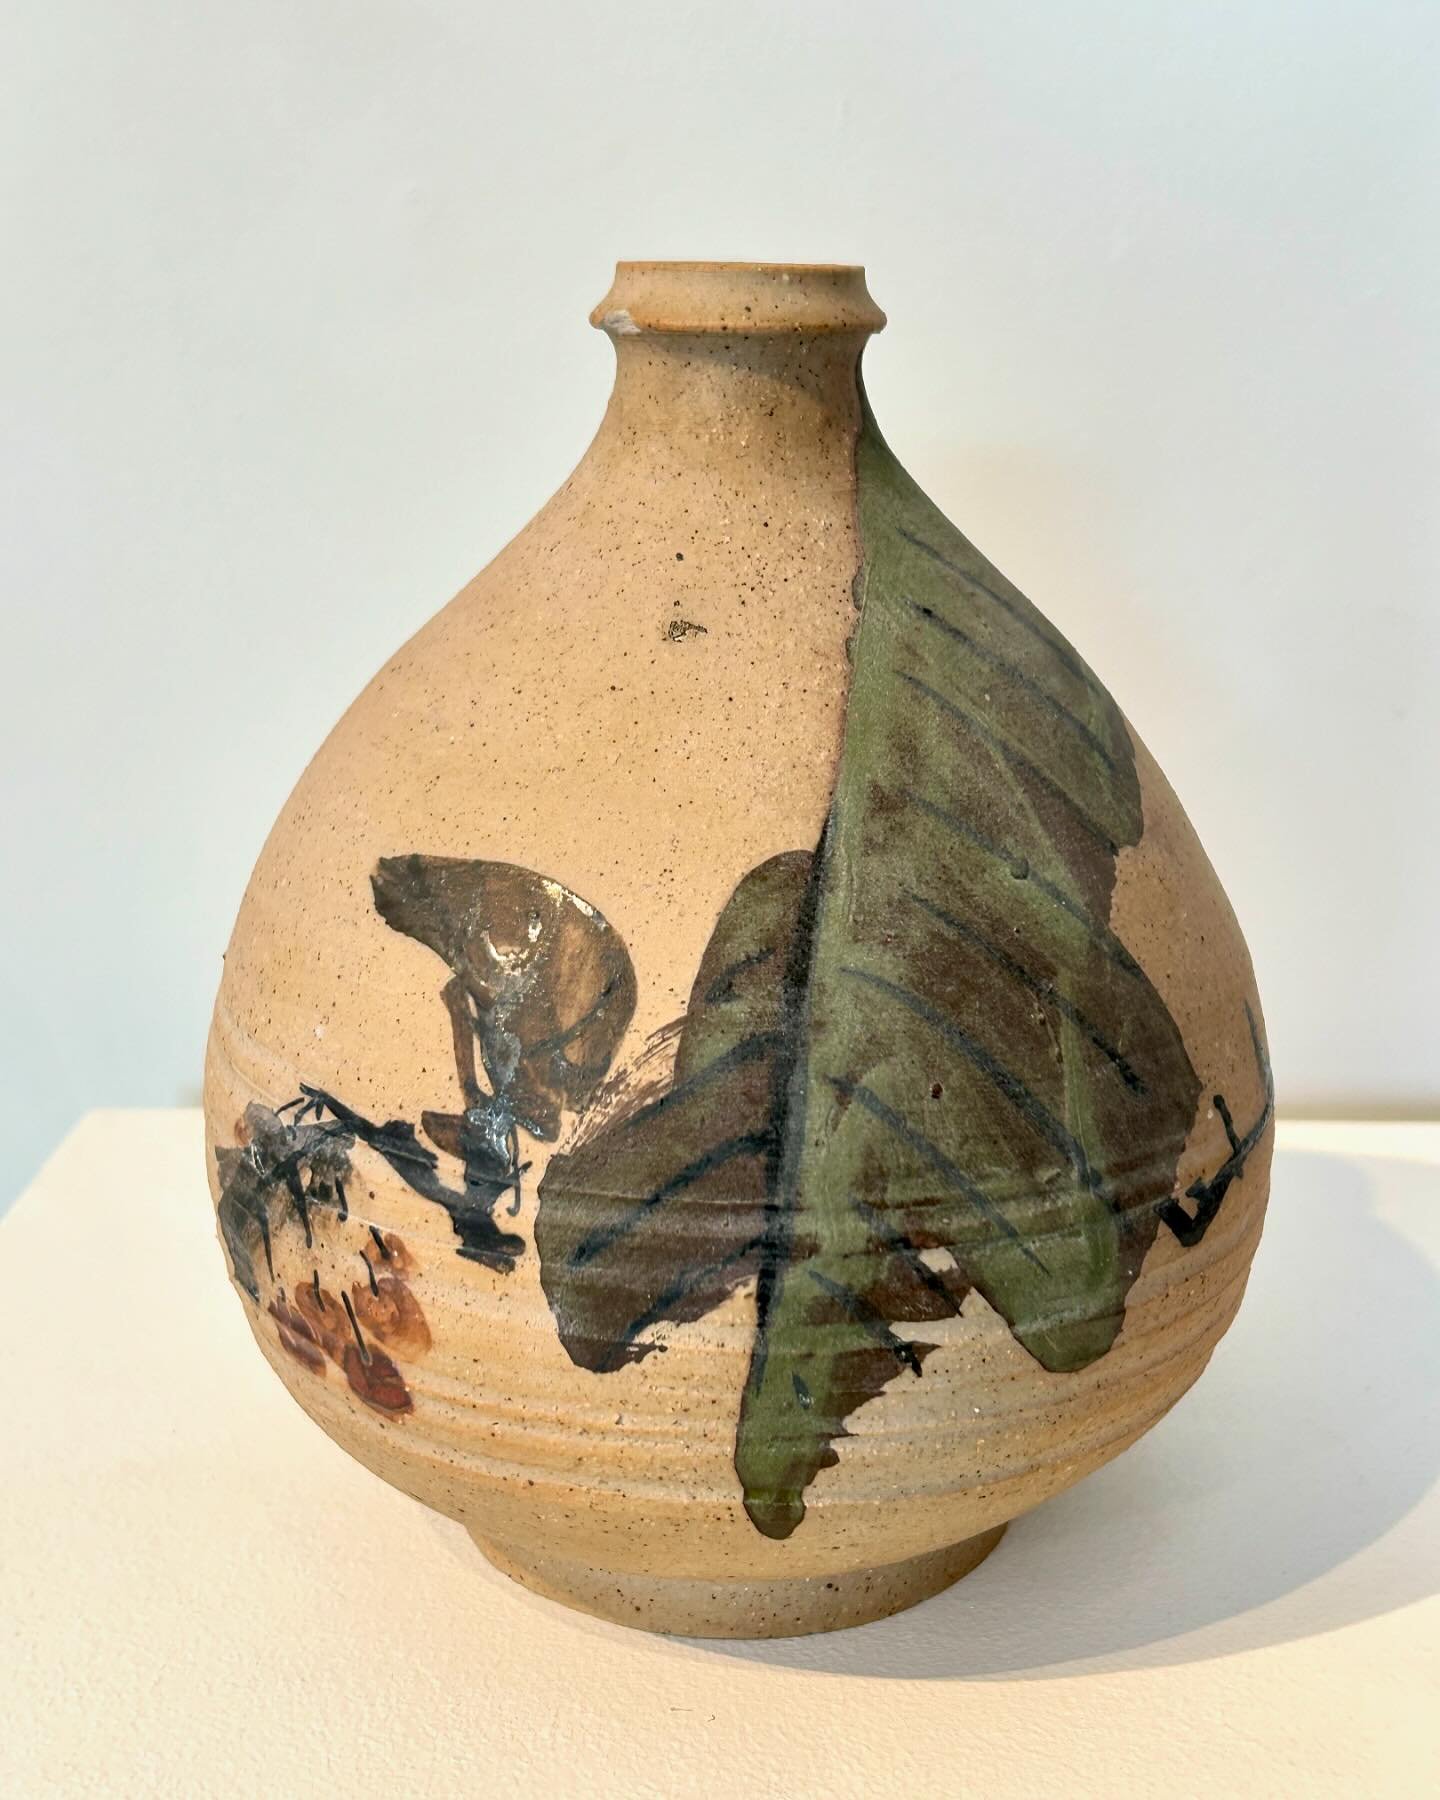 Currently on view in the Katherine Choy Collection at Clay Art Center are these two wheel thrown stoneware vases, made in collaboration with acclaimed Chinese painter Zhang Daqian (Chinese 1898-1983) who is known to have visited Katherine at Clay Art